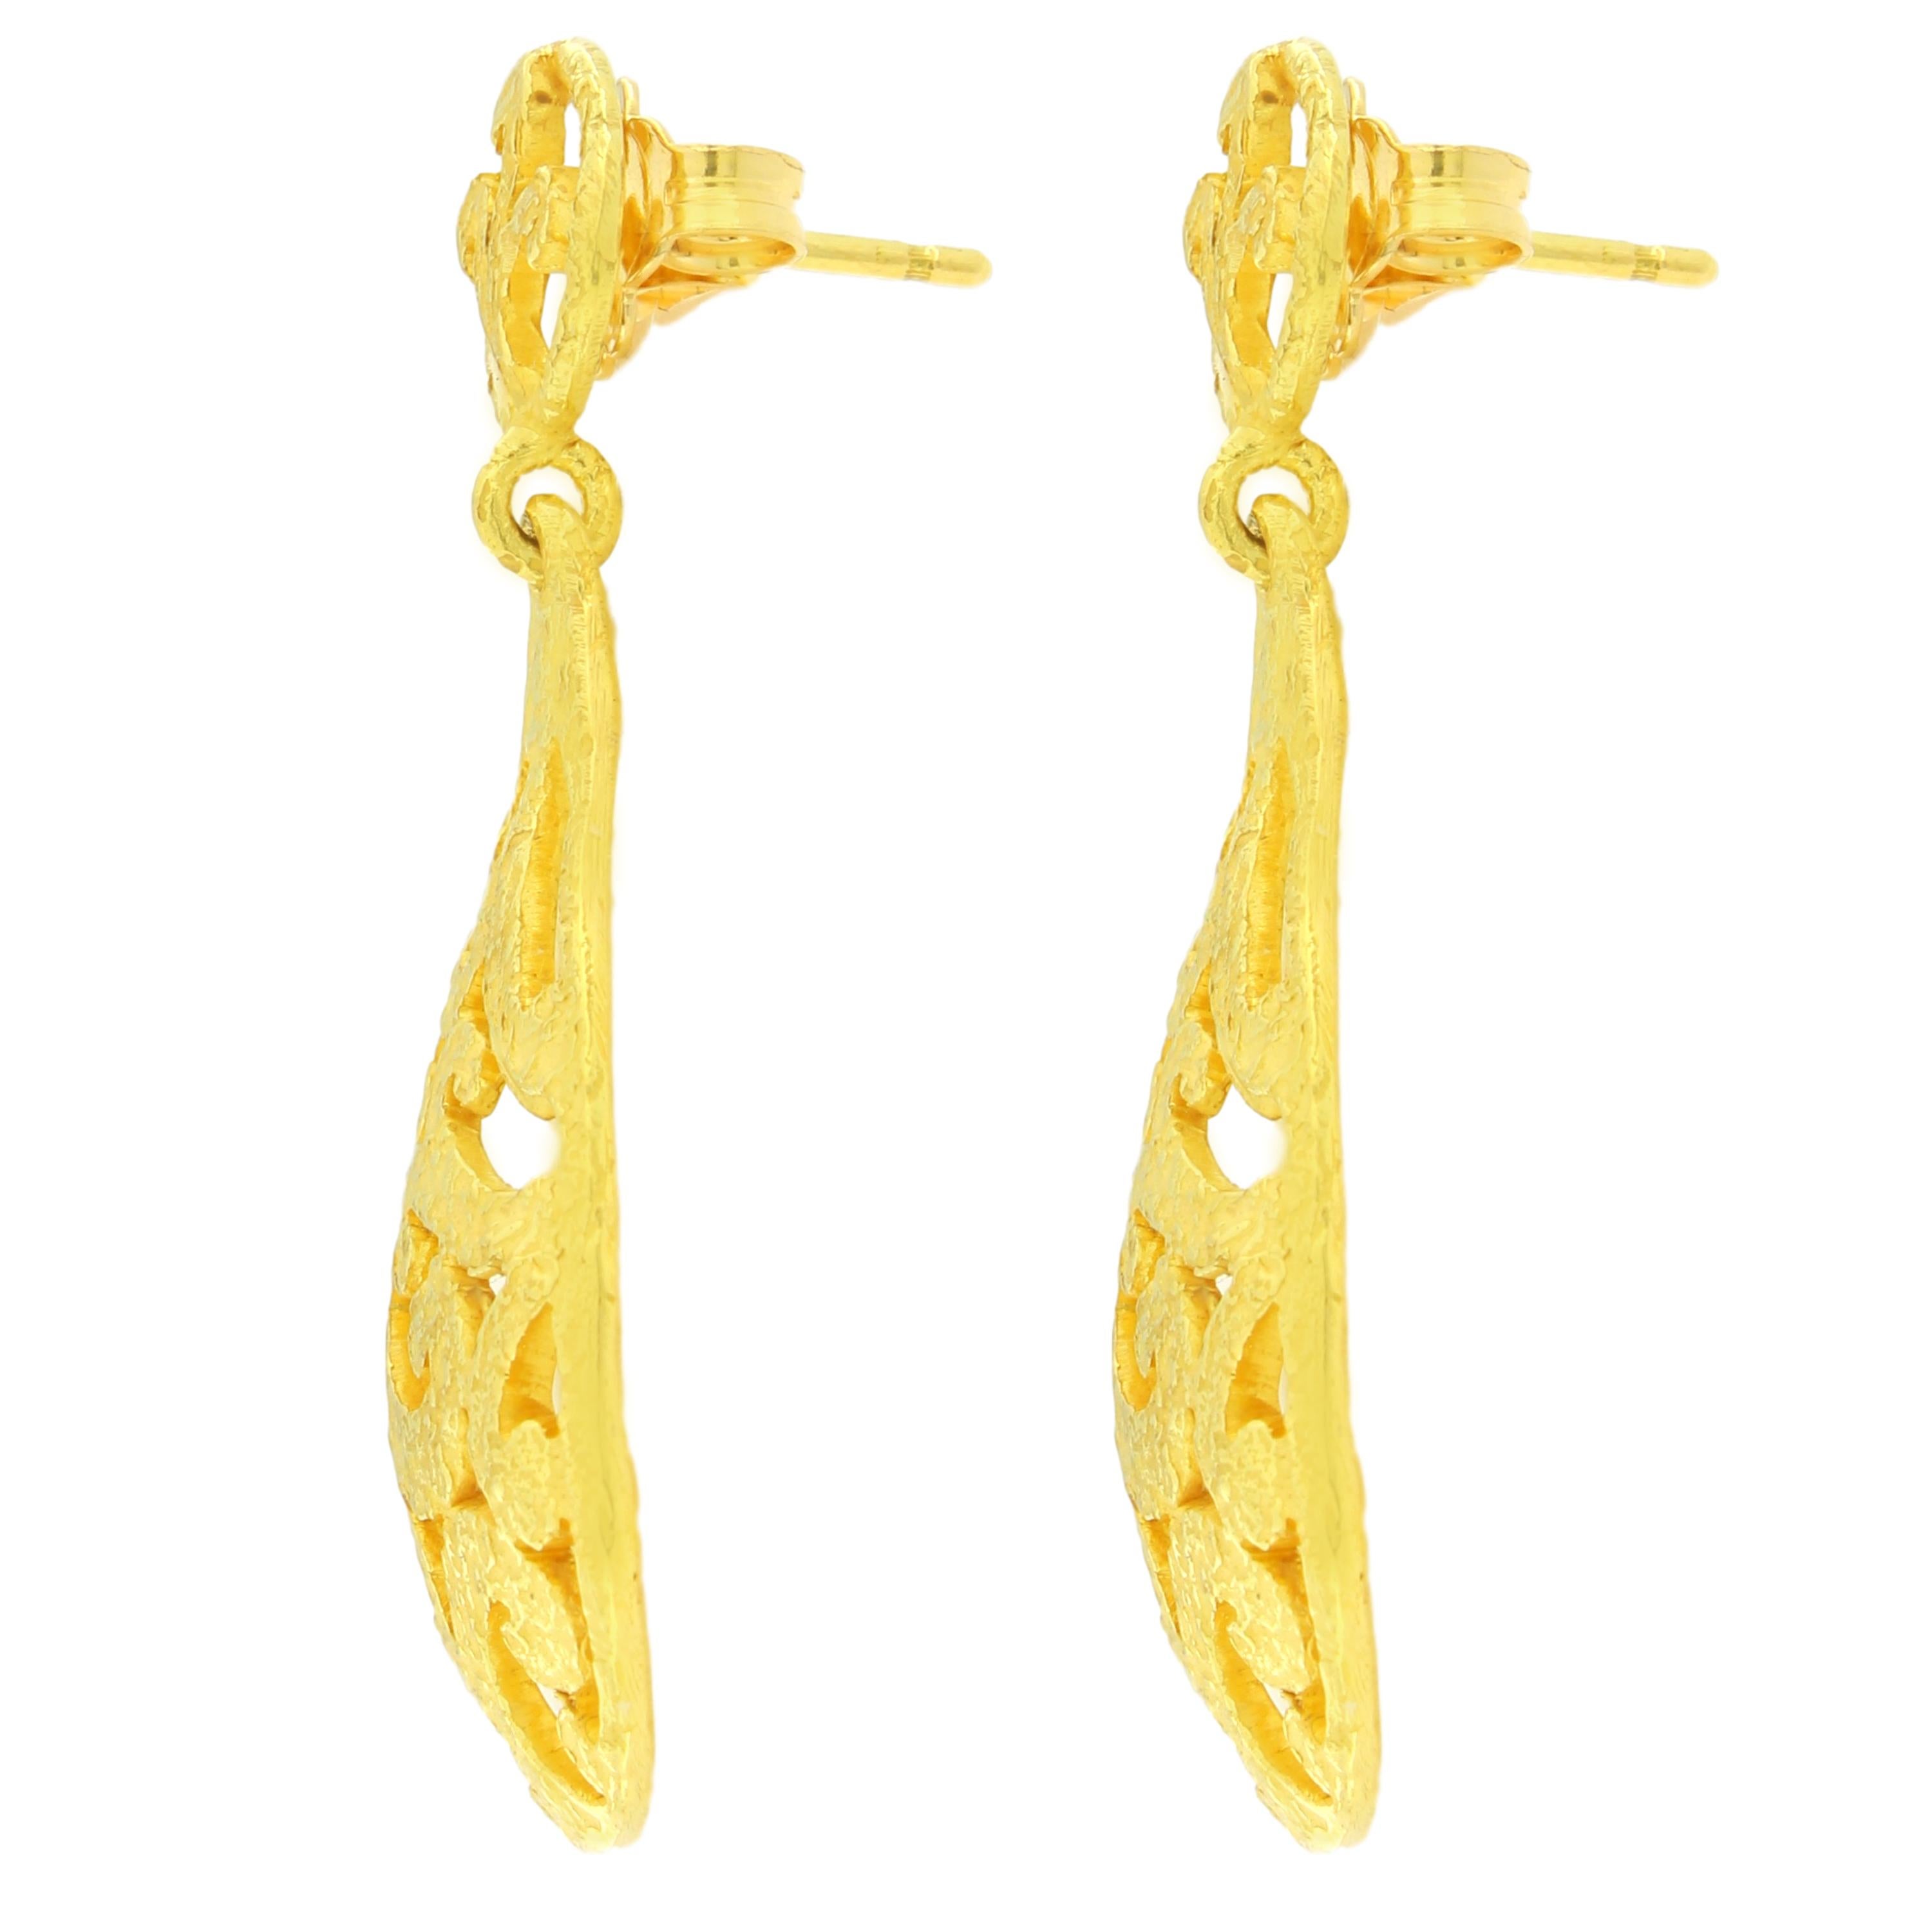 Gorgeous Art Deco Curlicue Style Drop Earrings in Satin Yellow Gold, hand-crafted with lost-wax casting technique.

Lost-wax casting, one of the oldest techniques for creating jewelry, forms the basis of Sacchi's jewelry production. Modelling wax in